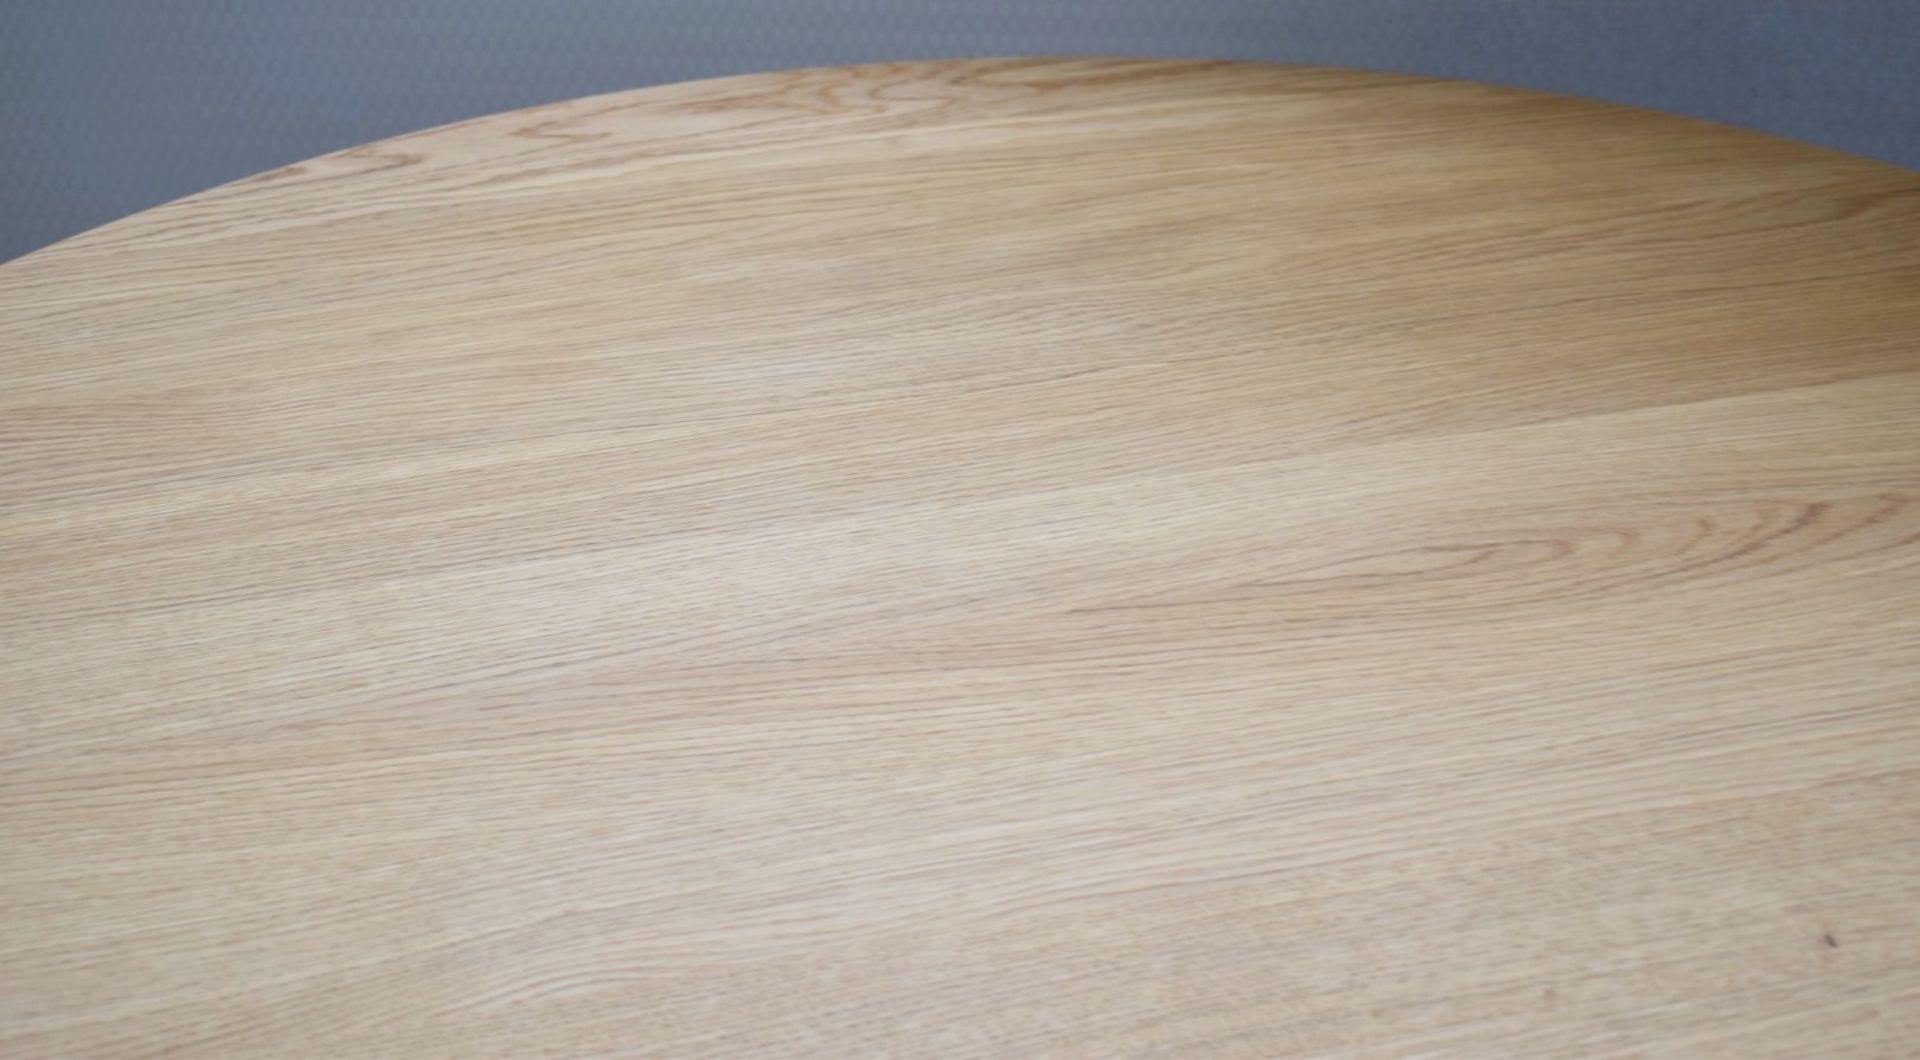 1 x VITRA / EAMES 'Segmented' Designer Solid Oak Topped Round Dining Table - Original Price £1,750 - Image 5 of 7